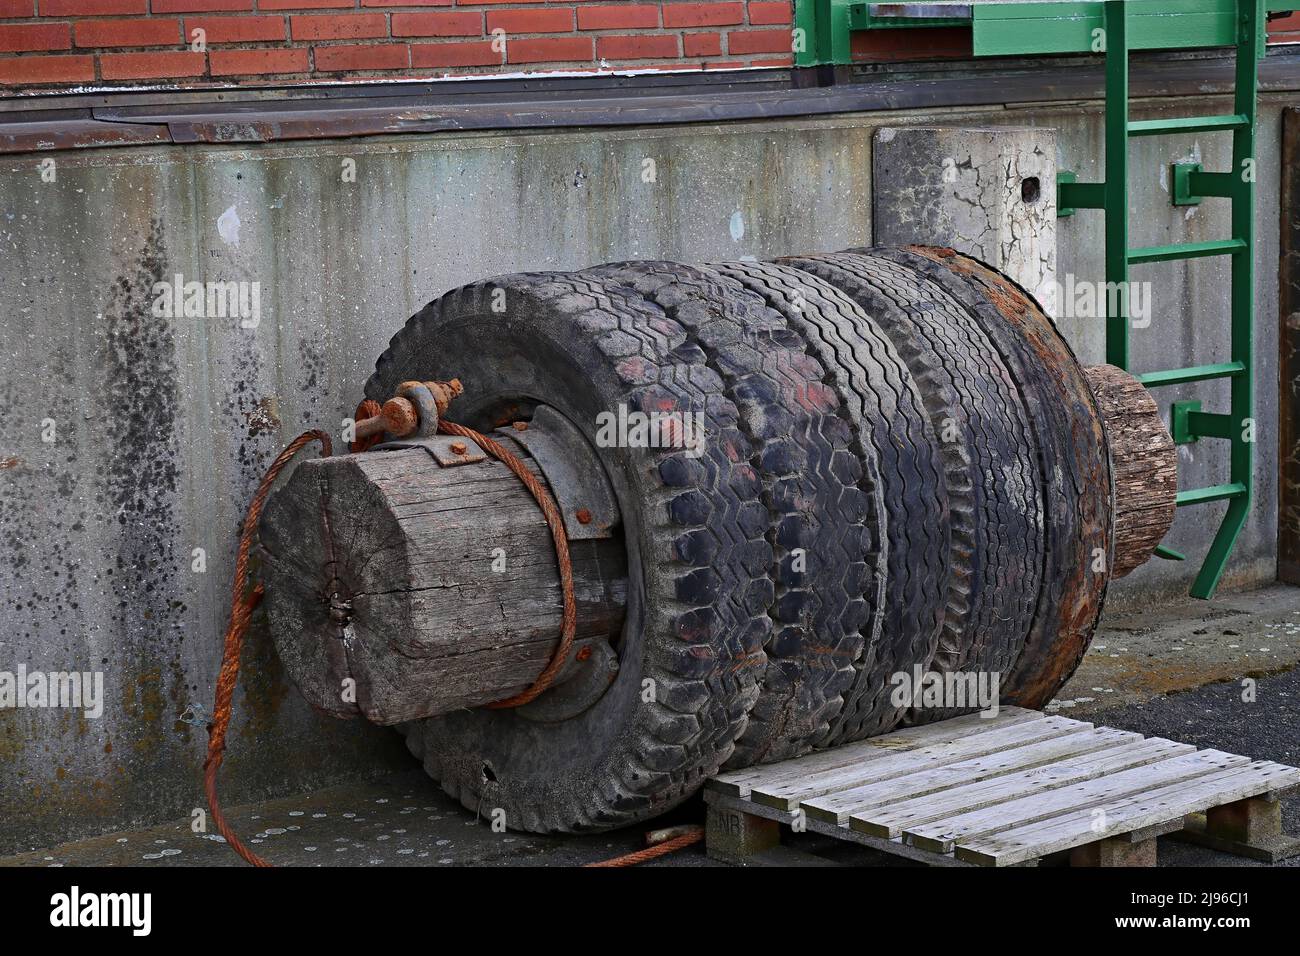 Impact protection - fenders - spacers - for ships - from old tires Stock Photo